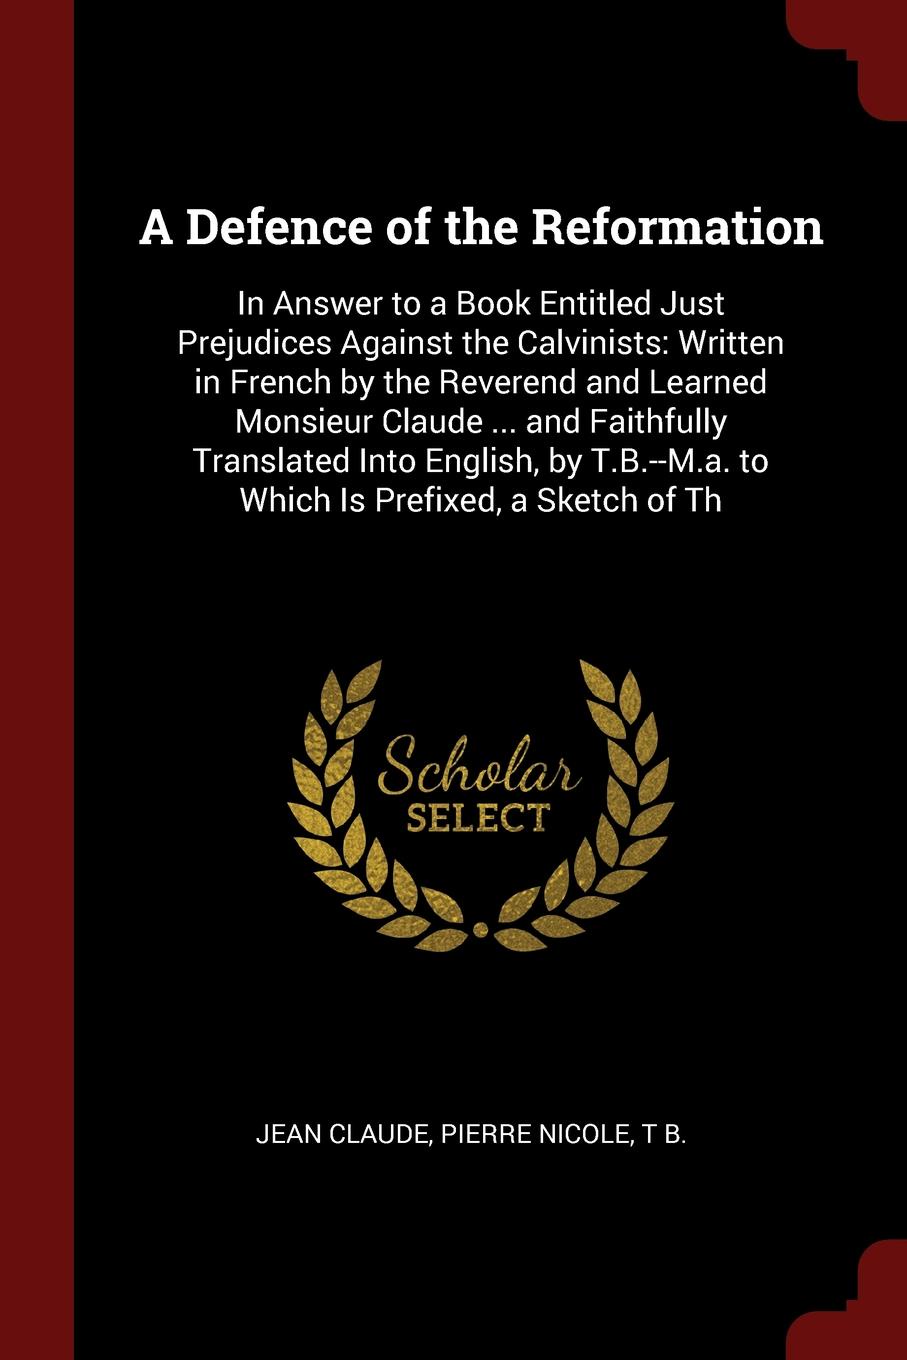 A Defence of the Reformation. In Answer to a Book Entitled Just Prejudices Against the Calvinists: Written in French by the Reverend and Learned Monsieur Claude ... and Faithfully Translated Into English, by T.B.--M.a. to Which Is Prefixed, a Sket...